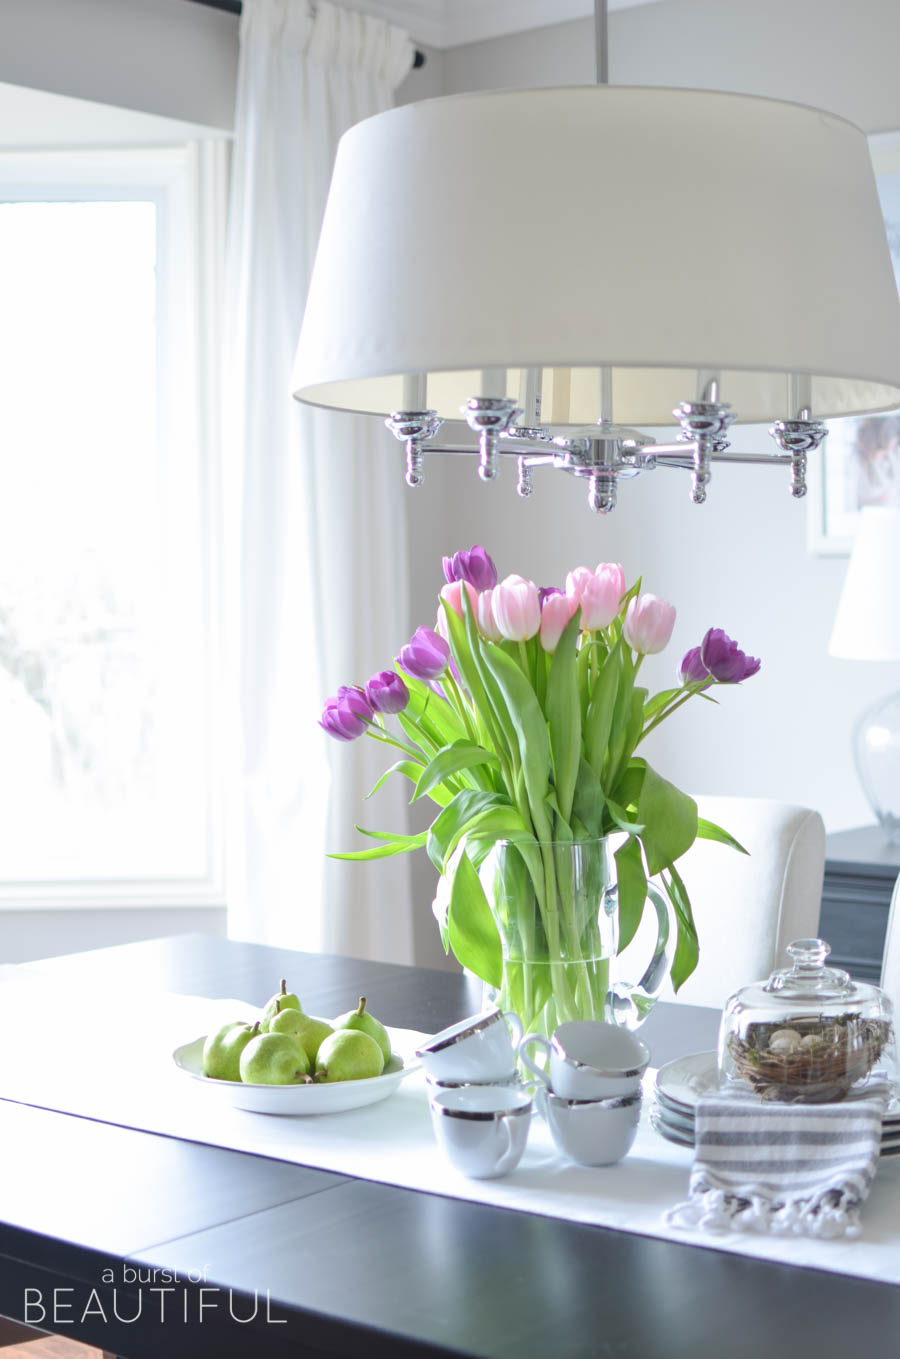 Spring flowers, like potted hydrangeas and daffodils and simple arrangements of tulips, are a pretty and inexpensive way to welcome spring into your home. Tour this bright and cheerful modern farmhouse, along with 16 other beautiful blogger homes in this stunning spring home tour | A Burst of Beautiful 